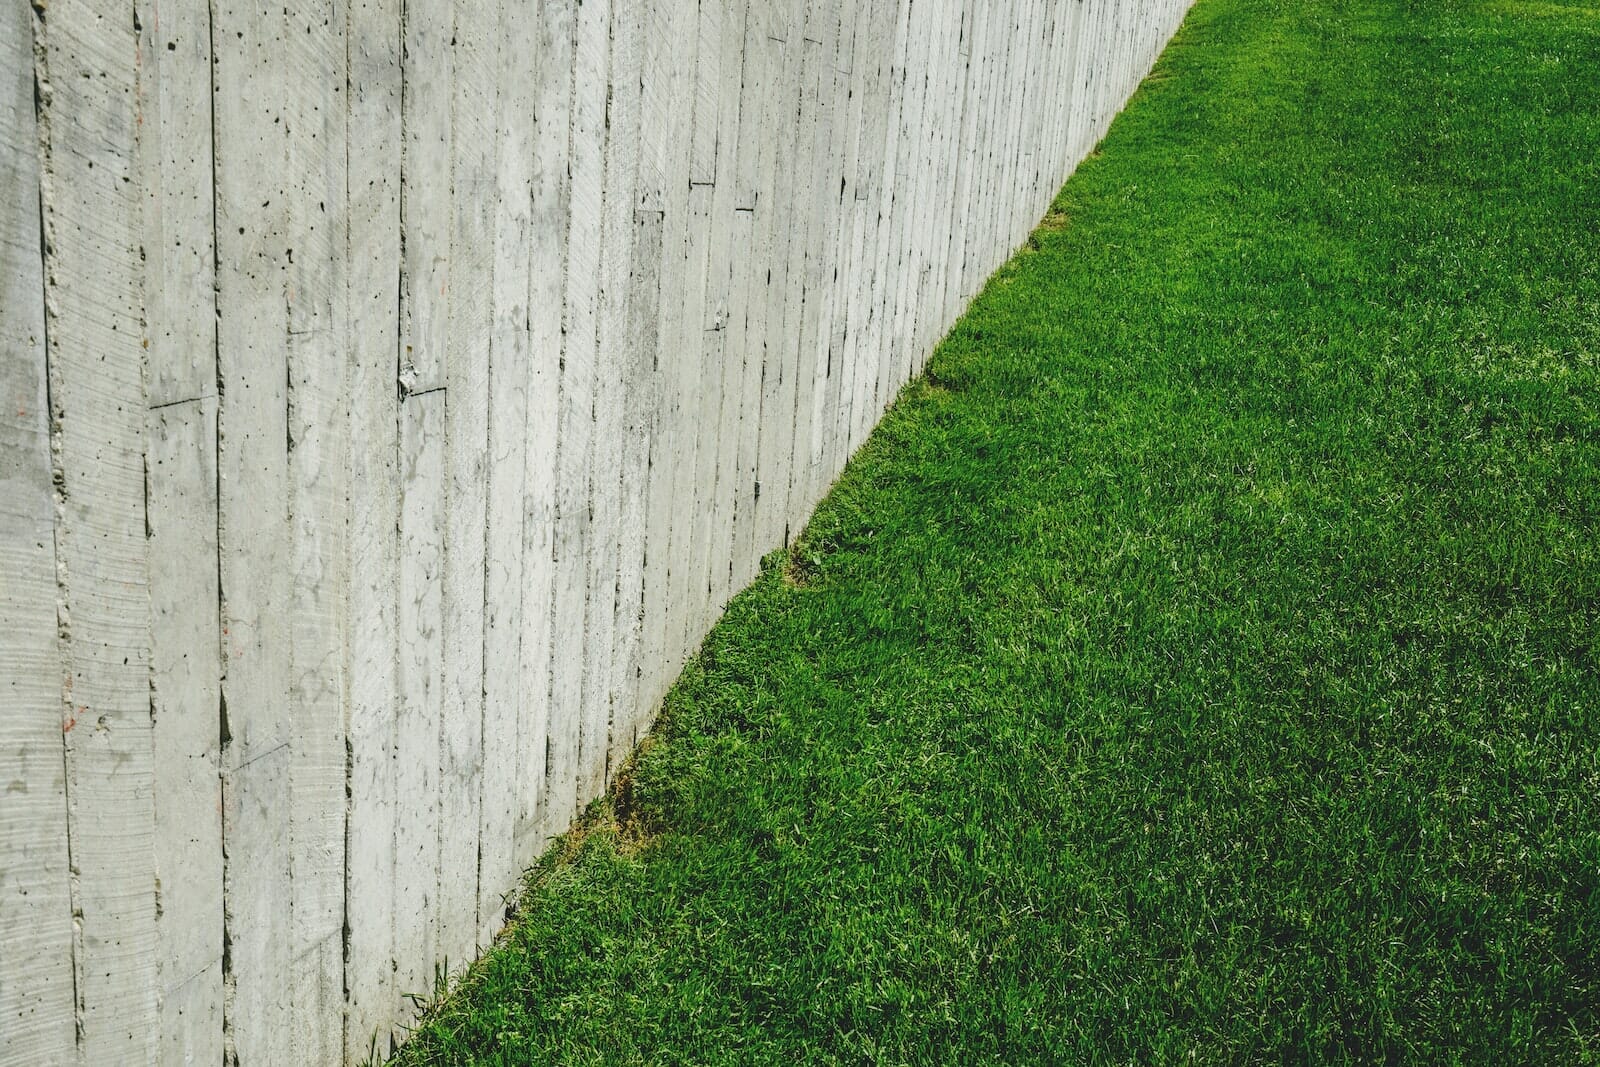 Should a Fence Be Level or Follow the Ground